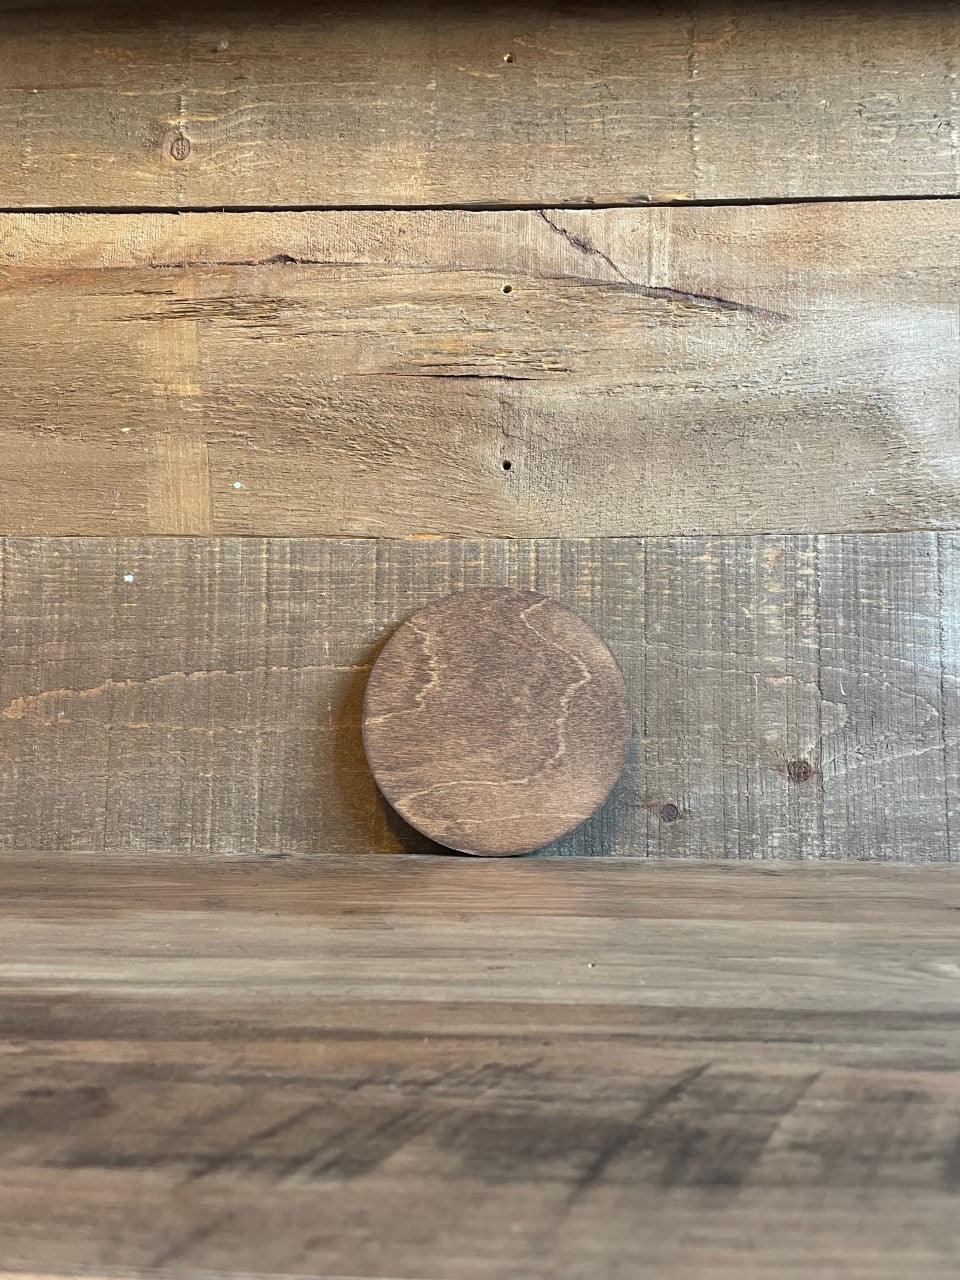 Pre-Stained Classic Wood Round - Blank Supply